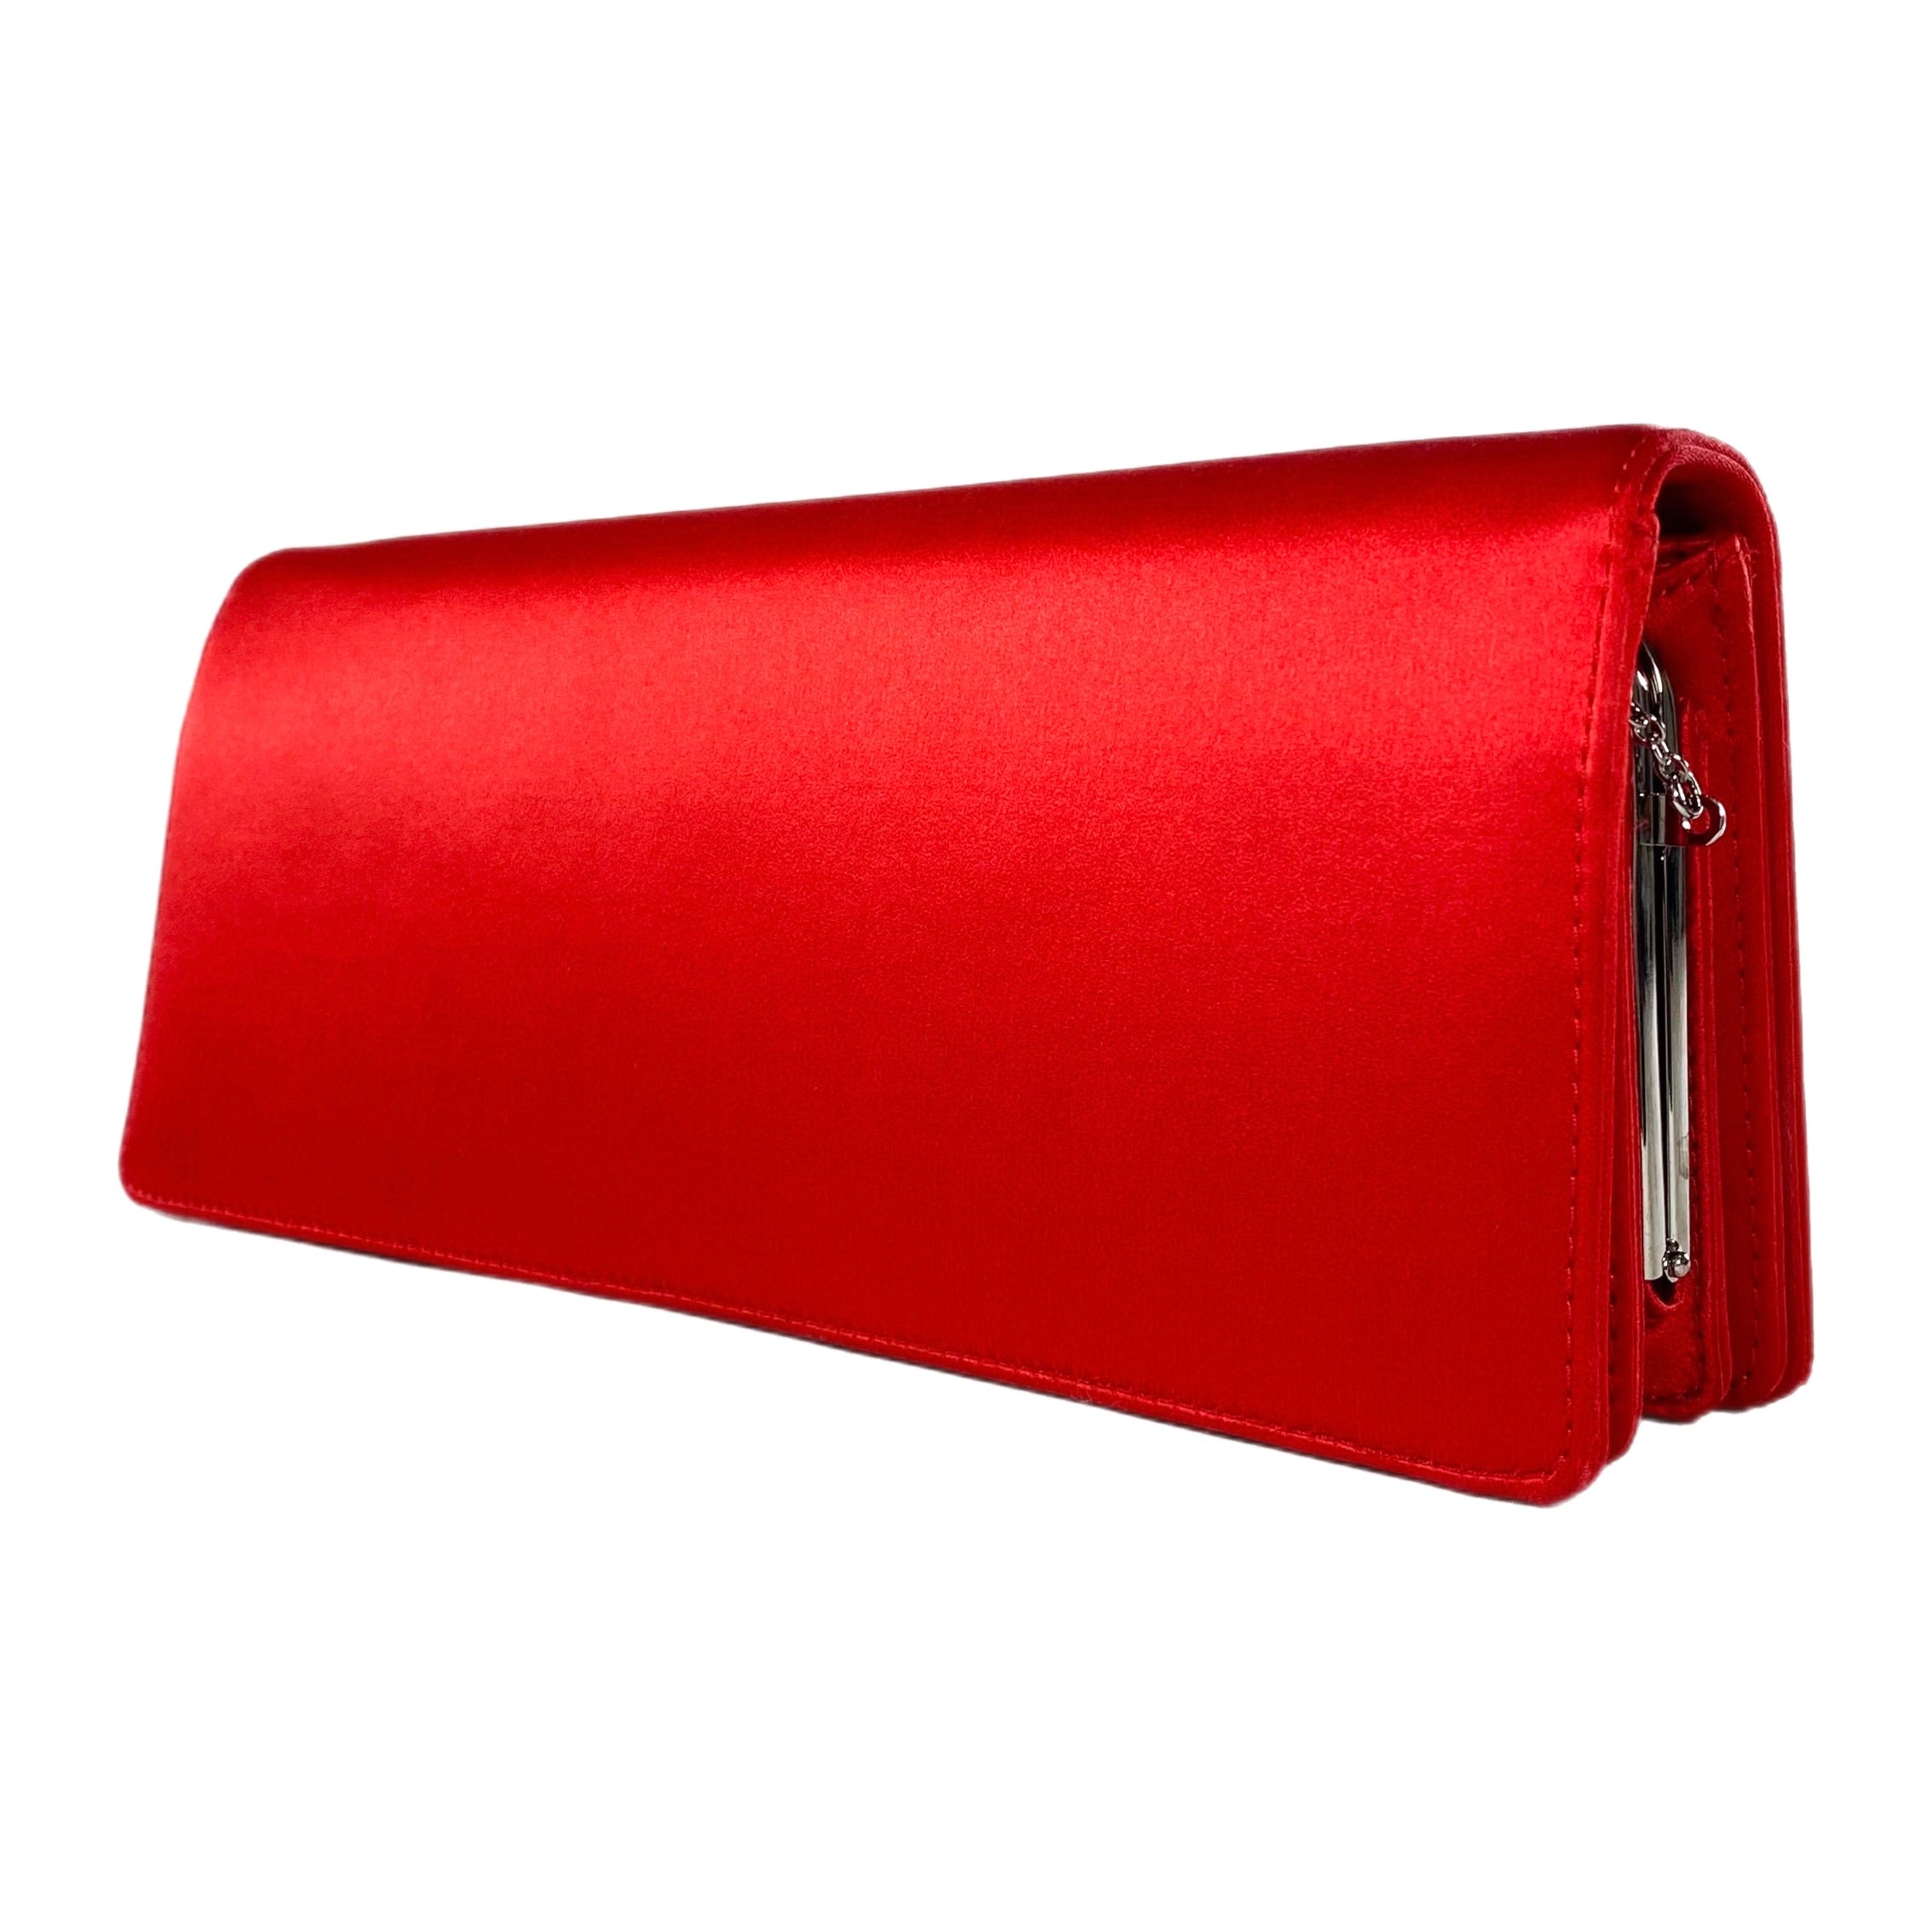 Valentino Red Satin Crystal Embellished Clutch with Chain